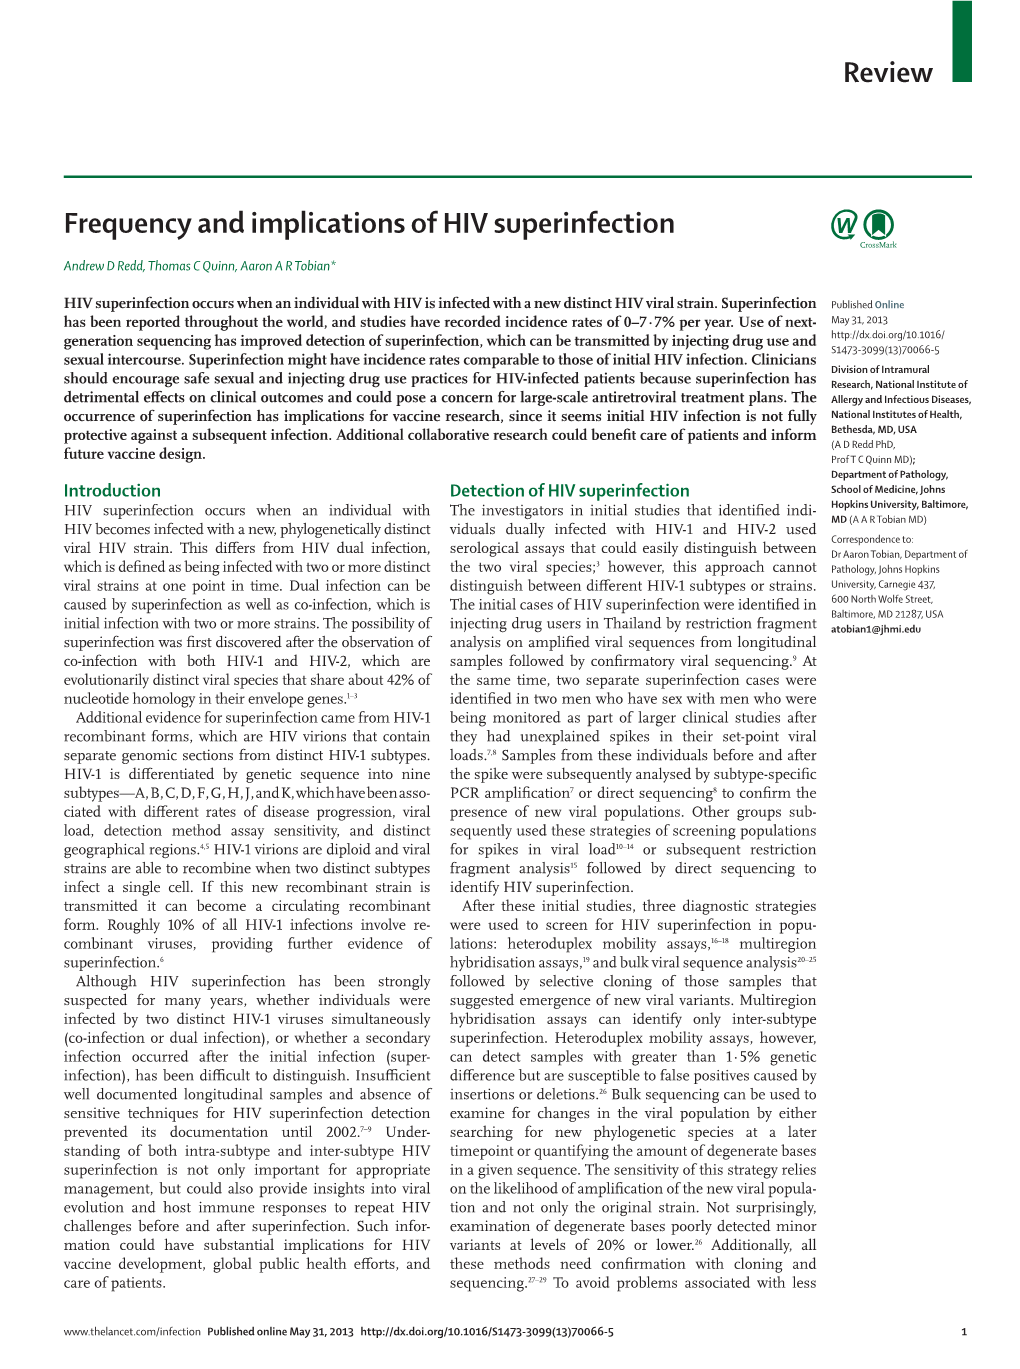 Frequency and Implications of HIV Superinfection